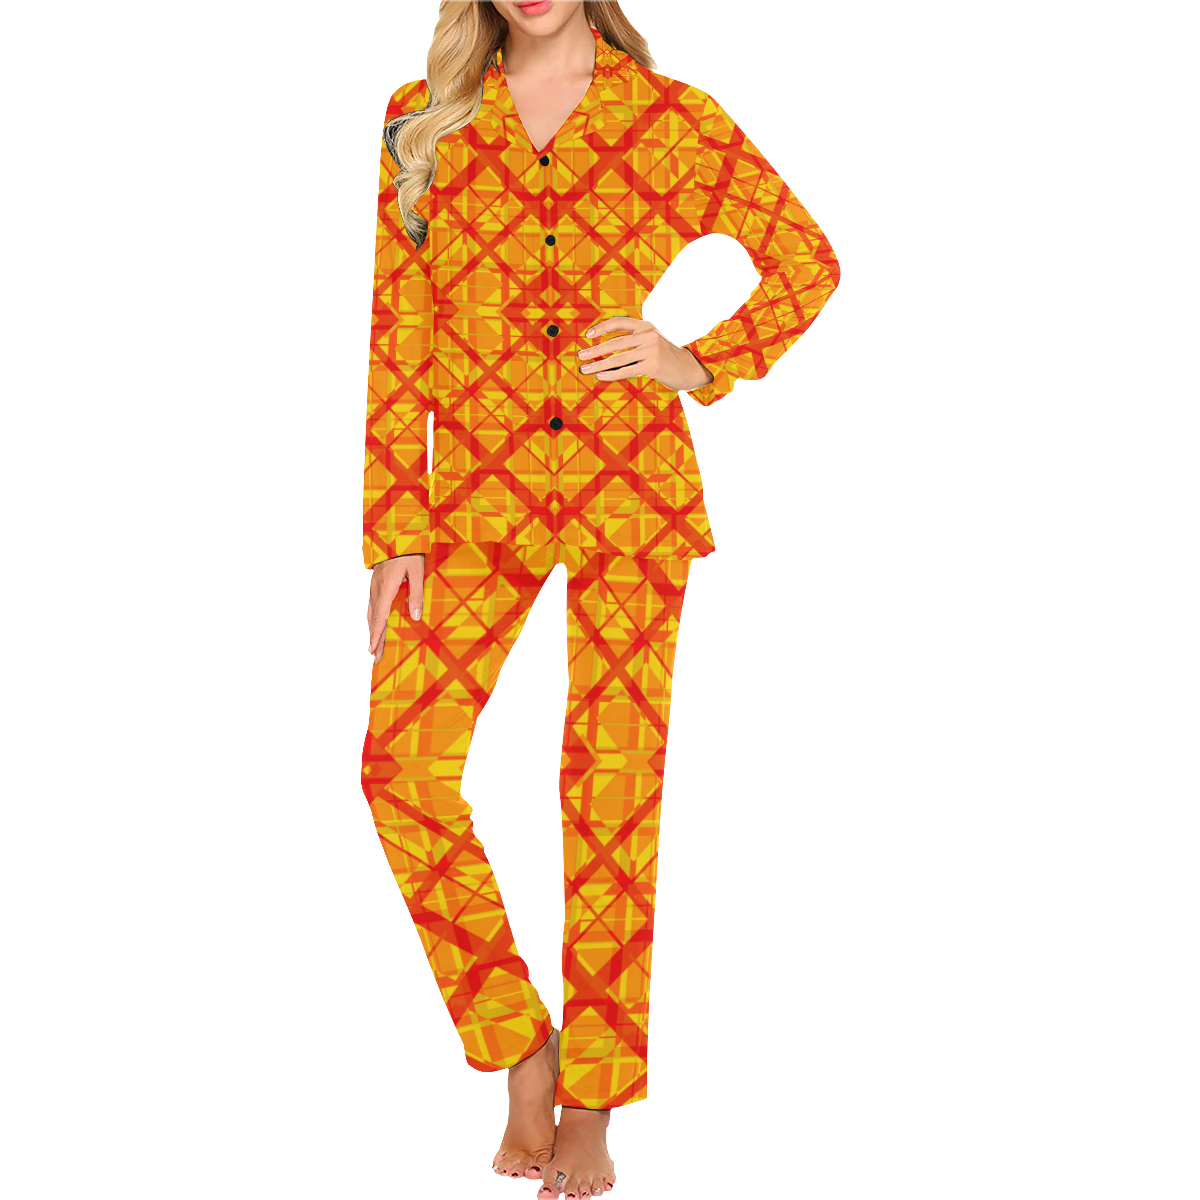 Fire Red and Yellow Plaid Pattern Women's Long Pajama Set